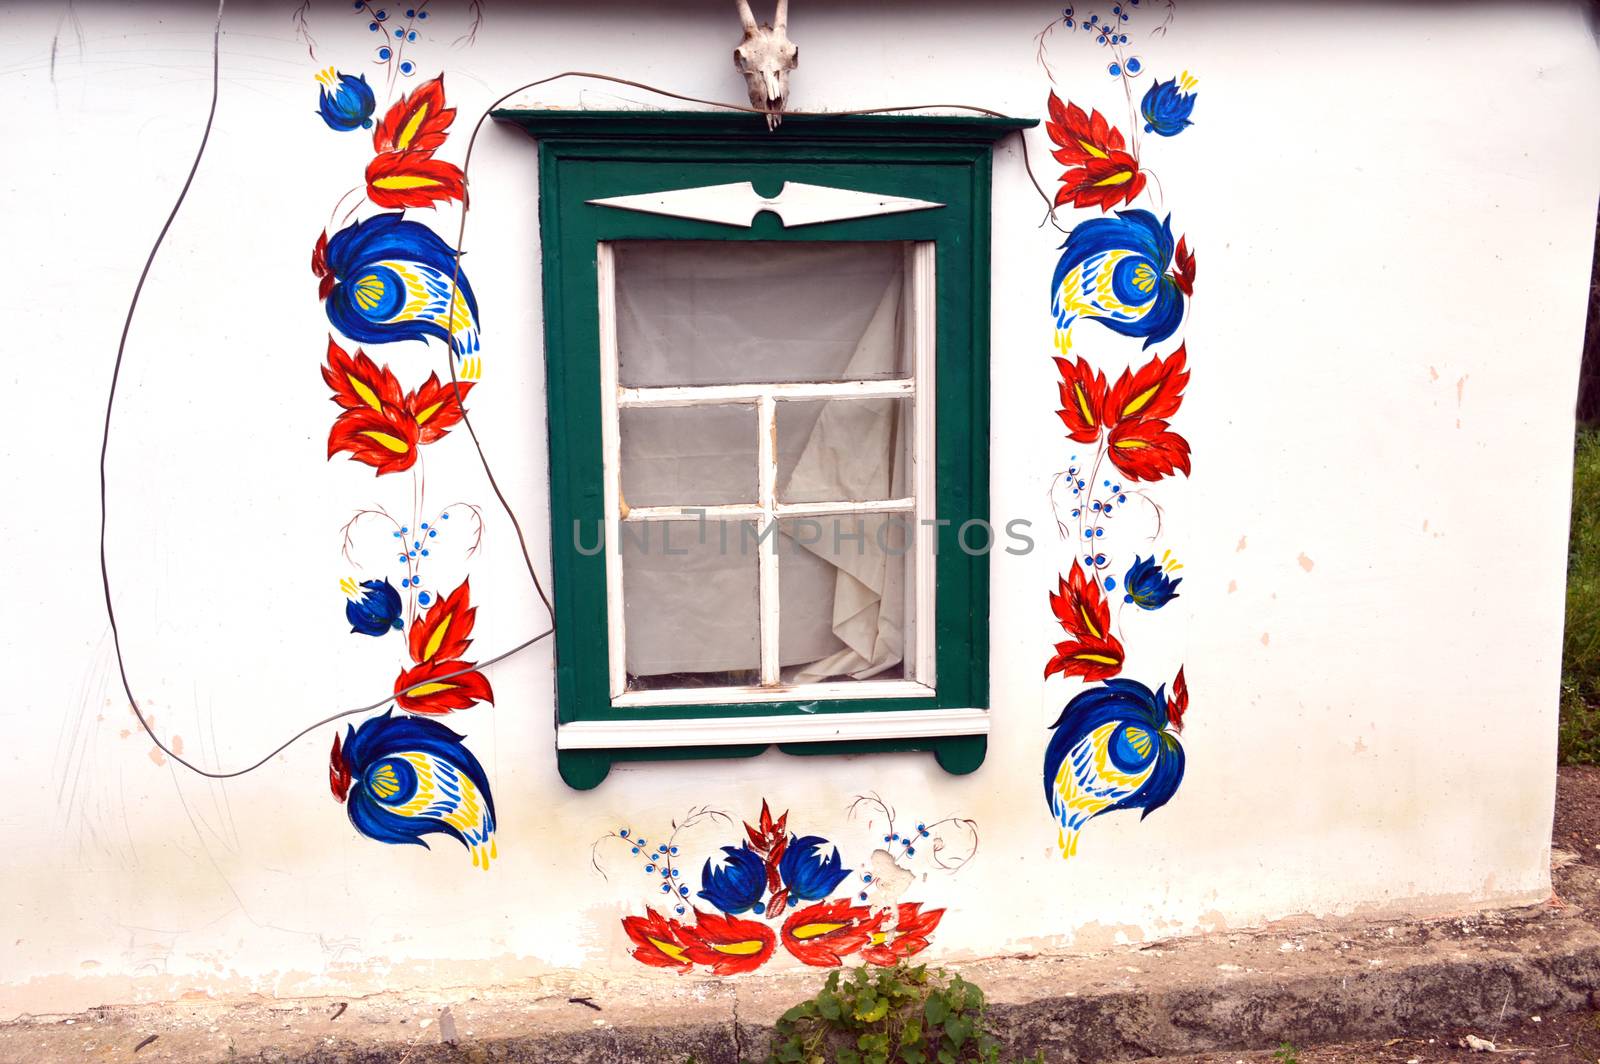 facade of the Ukrainian hut with a painting around the window